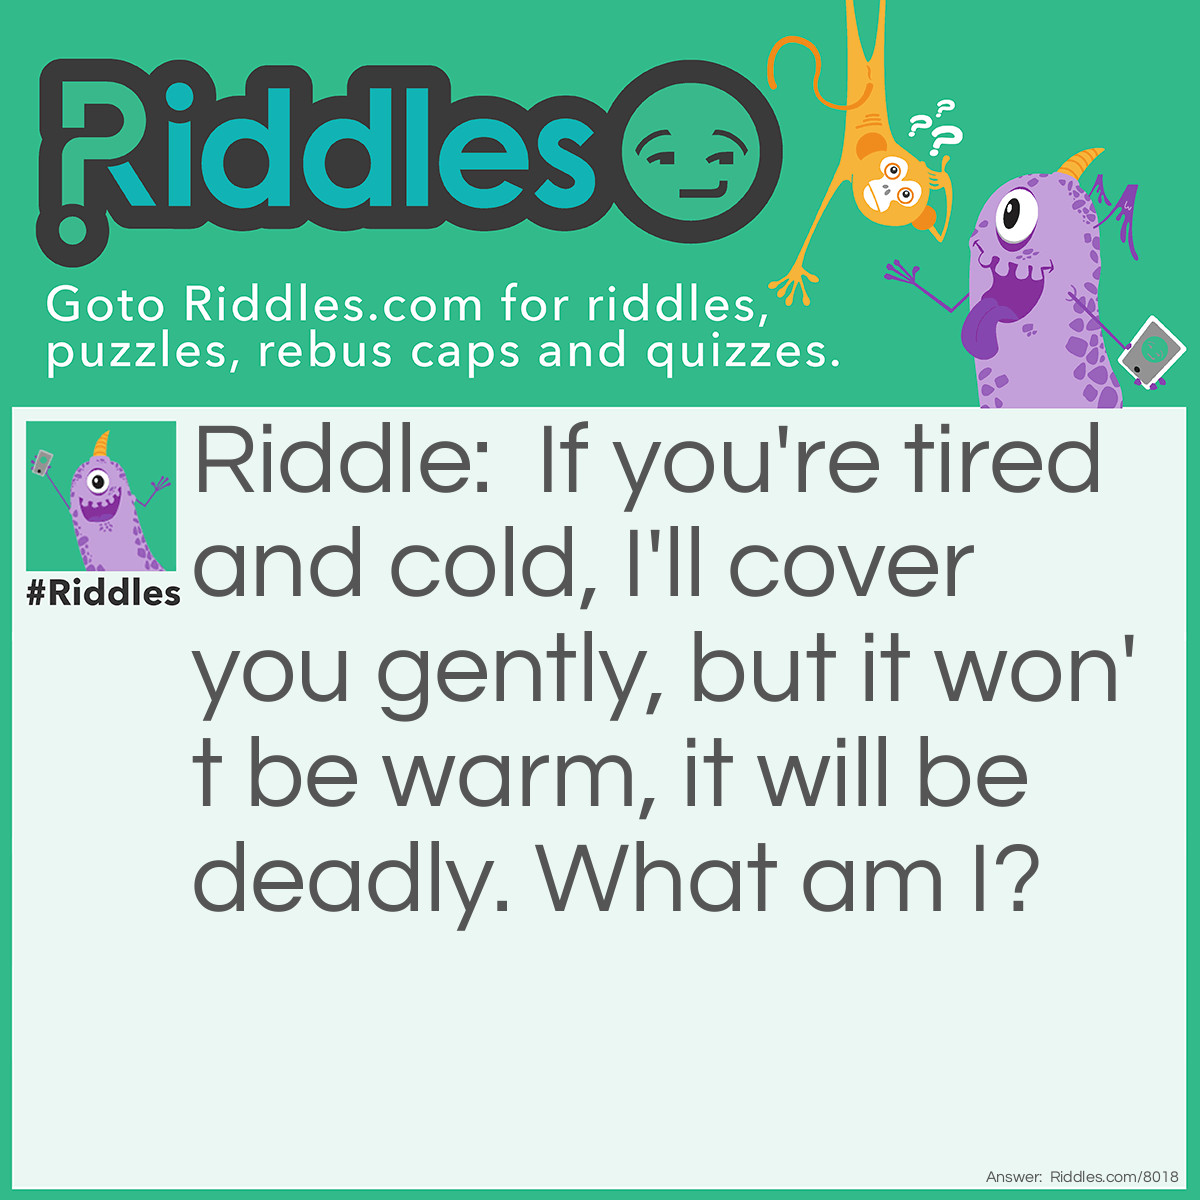 Riddle: If you're tired and cold, I'll cover you gently, but it won't be warm, it will be deadly. What am I? Answer: Snow.